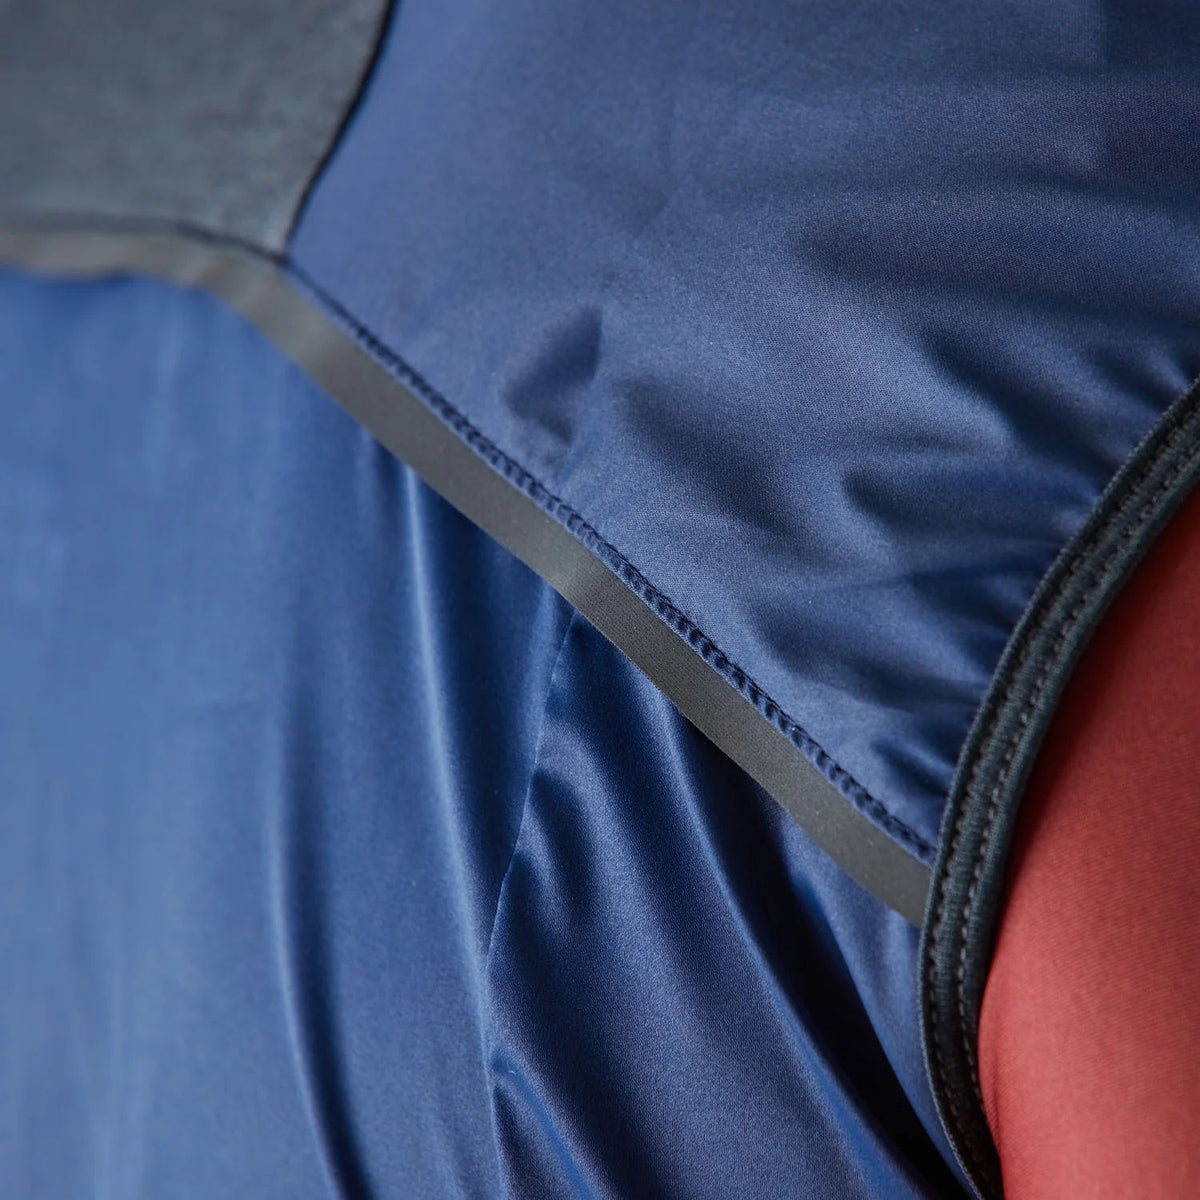 Givelo Quick-Free Gilet Blue メンズ サイクルジレ | GEARED